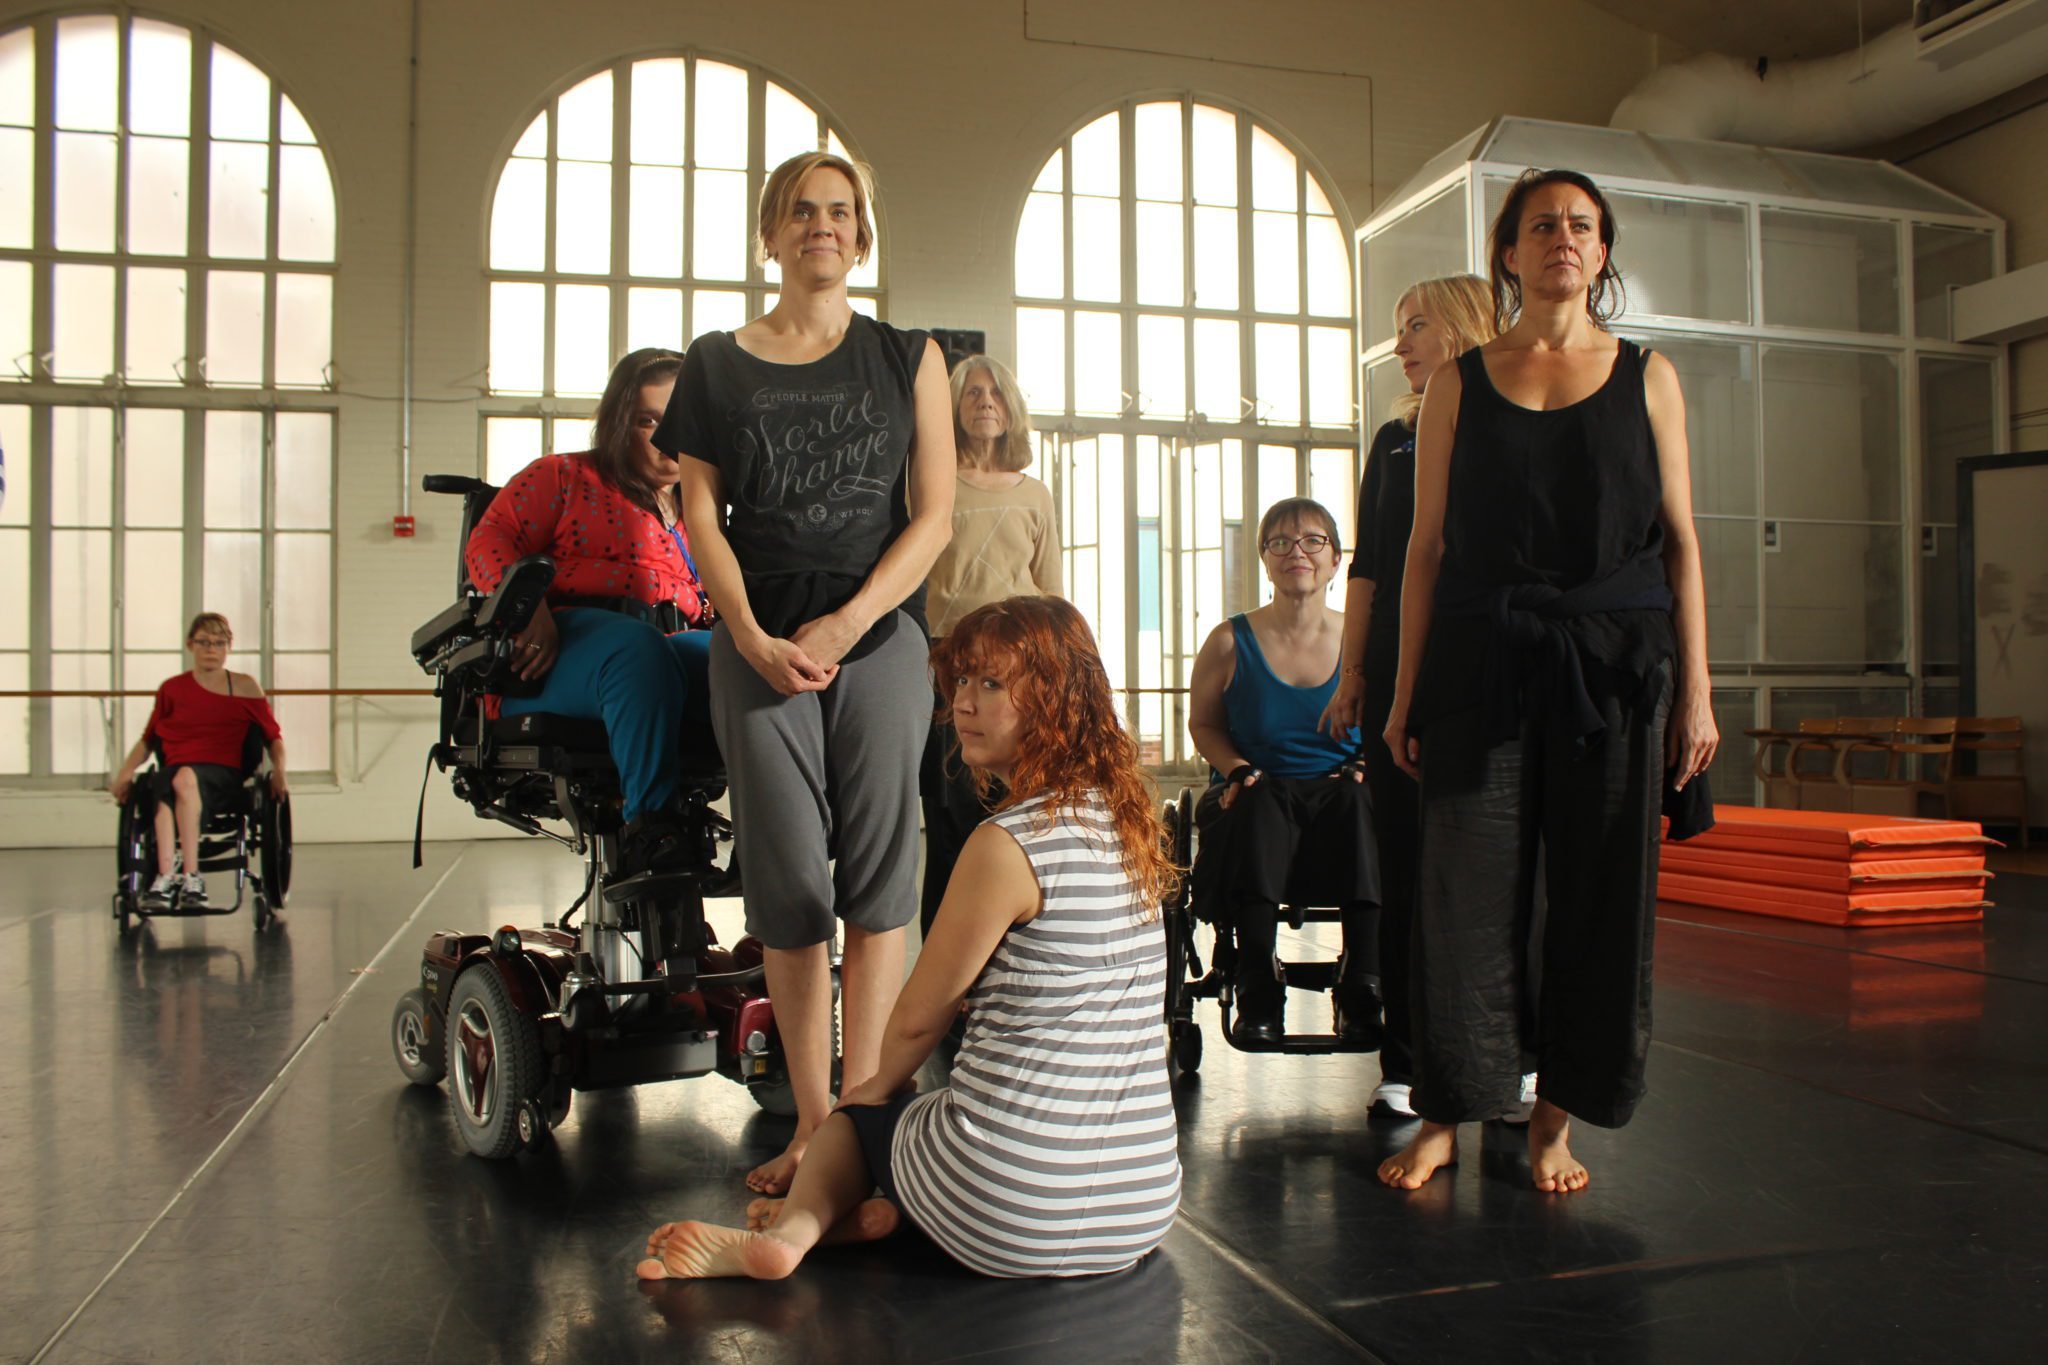 5 dancers with and without disabilities pose facing the camera.